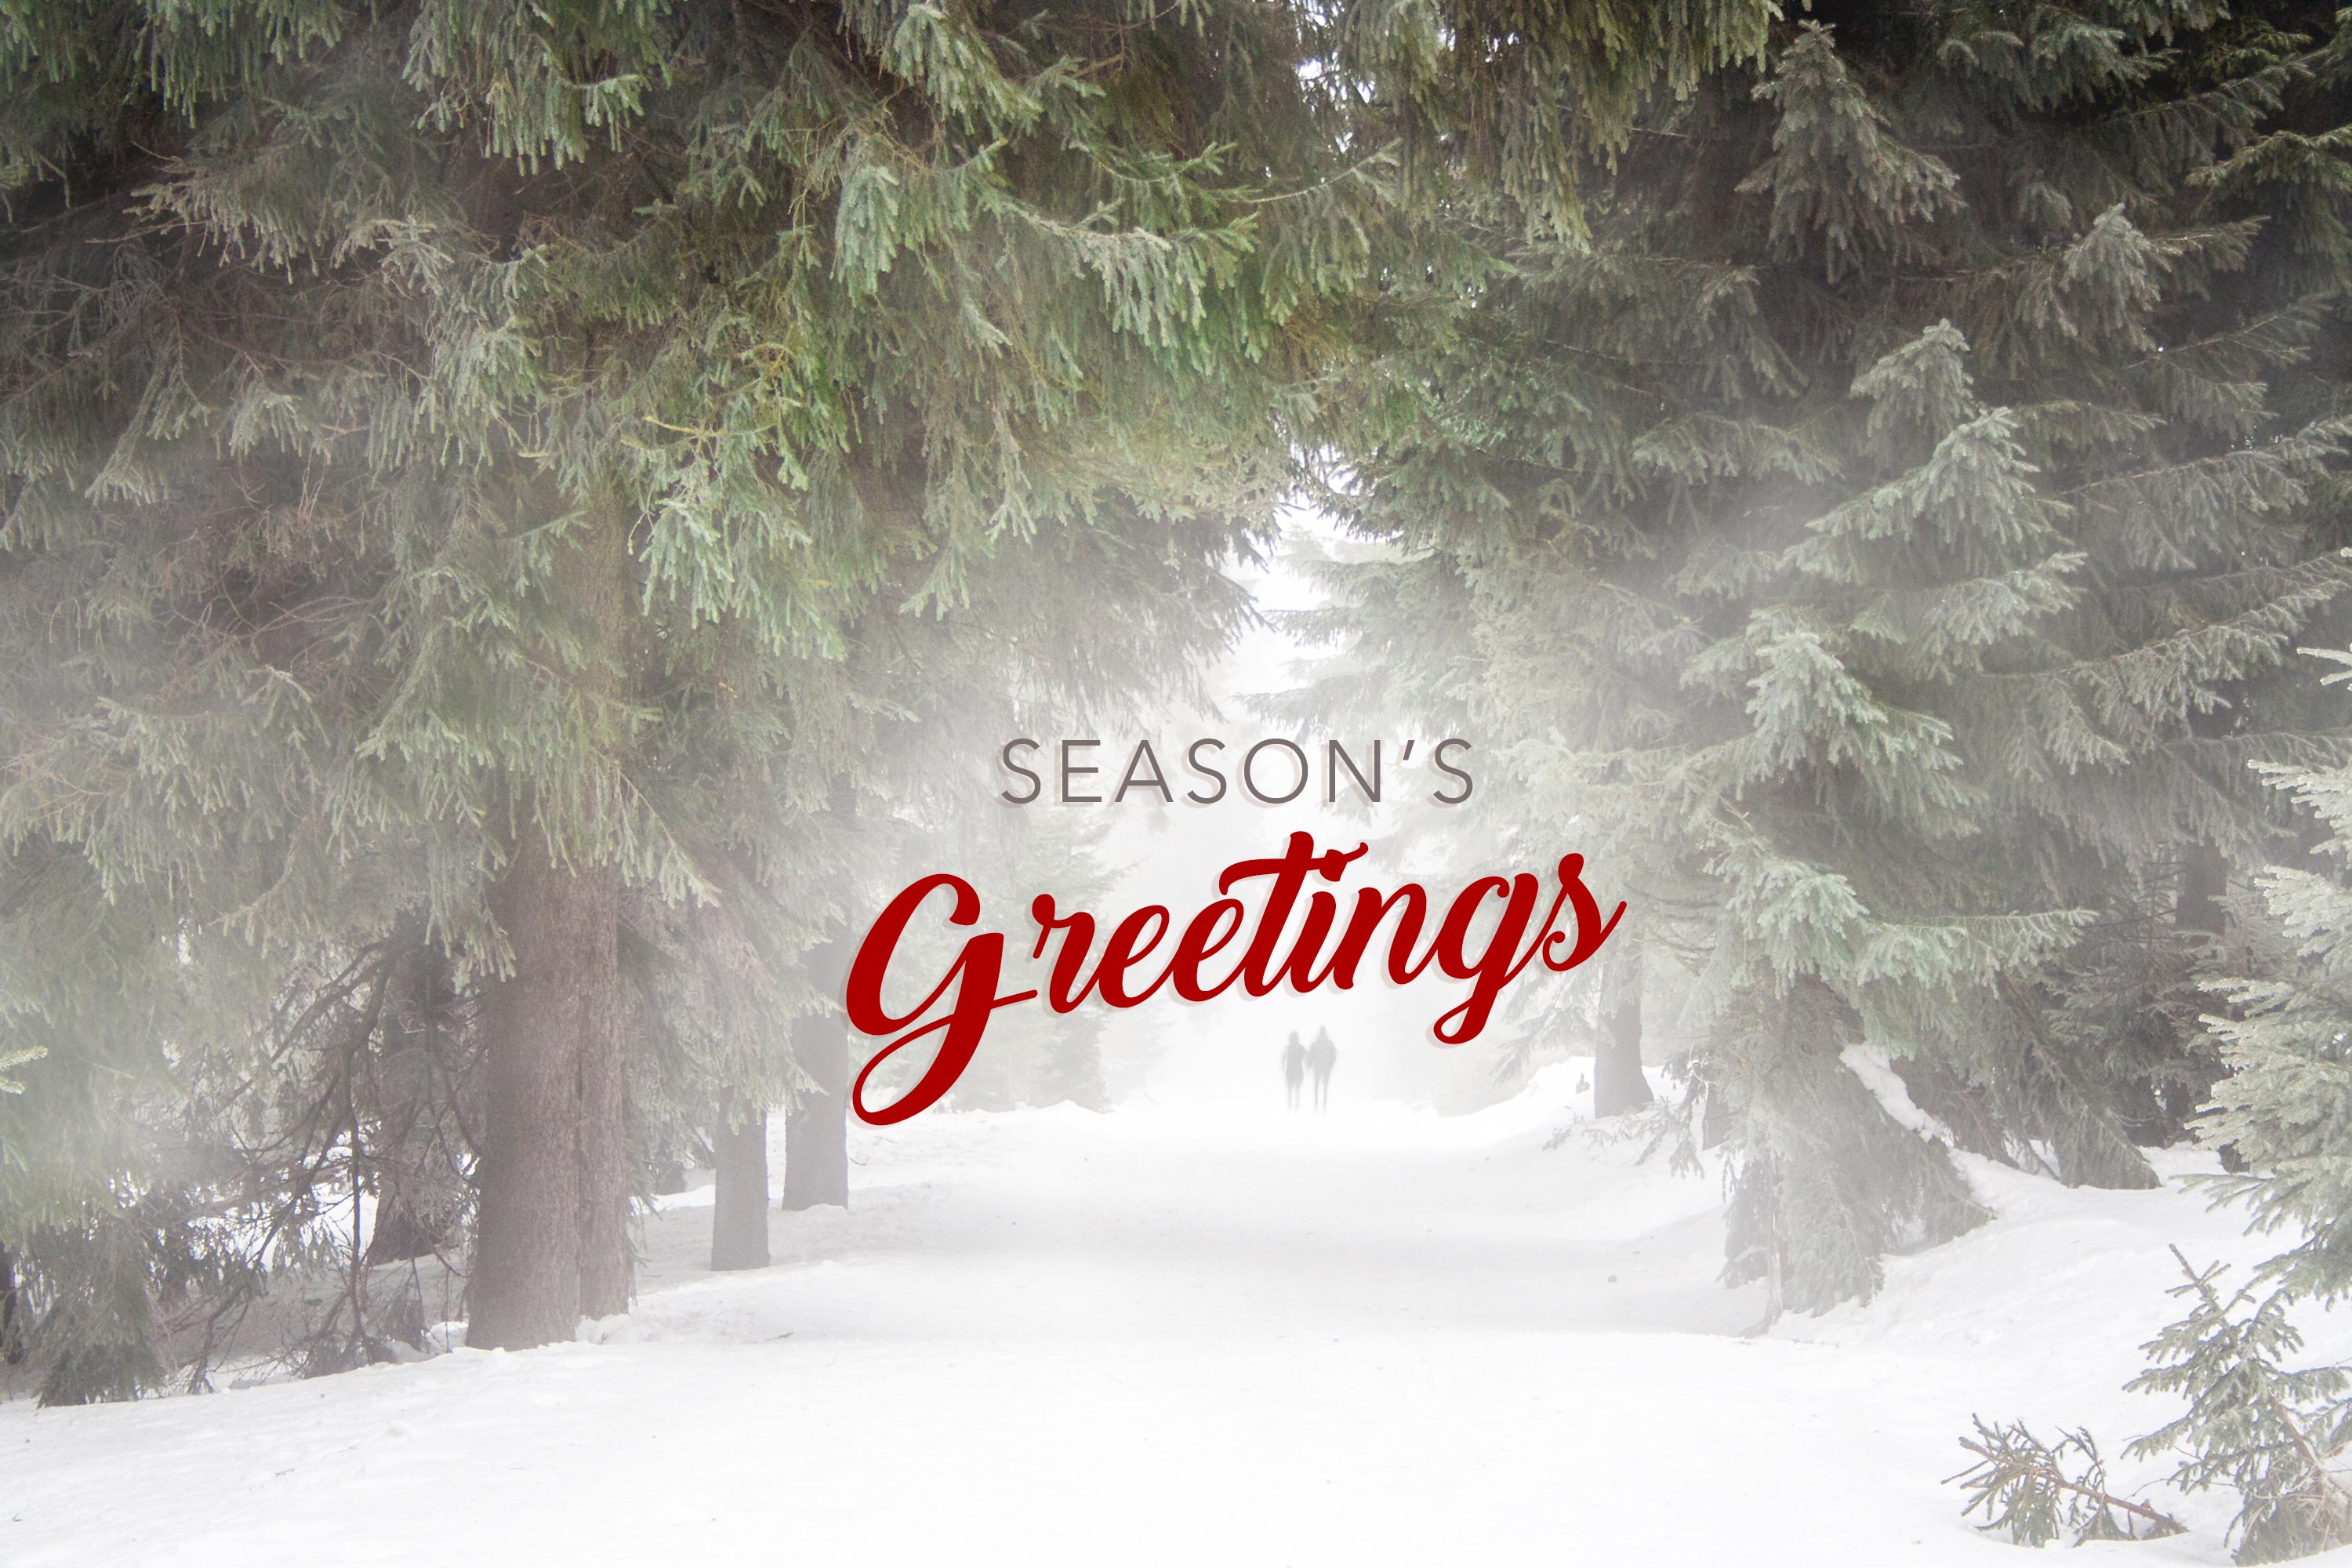 Free download 15 Seasons Greetings Cards Stock Images HD